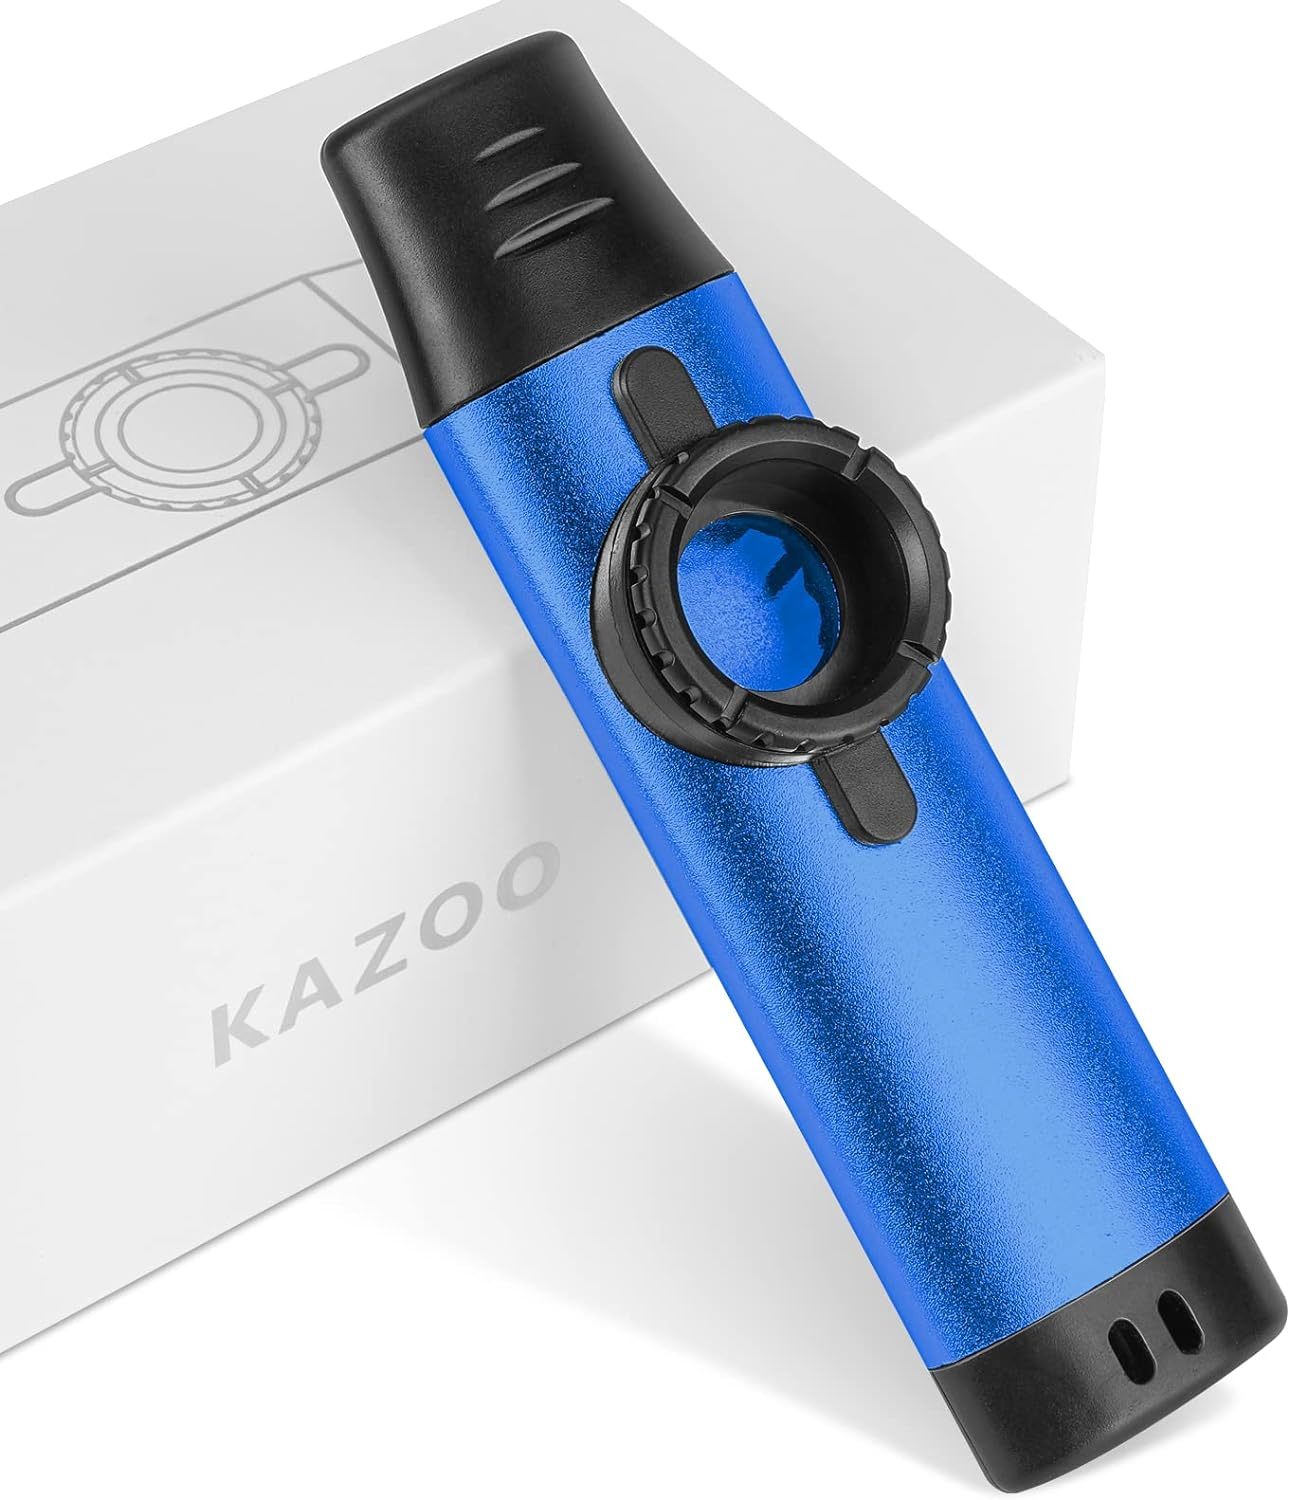 Kazoo Mirliton Flute With Metal Box Woodwind Musical Percussion